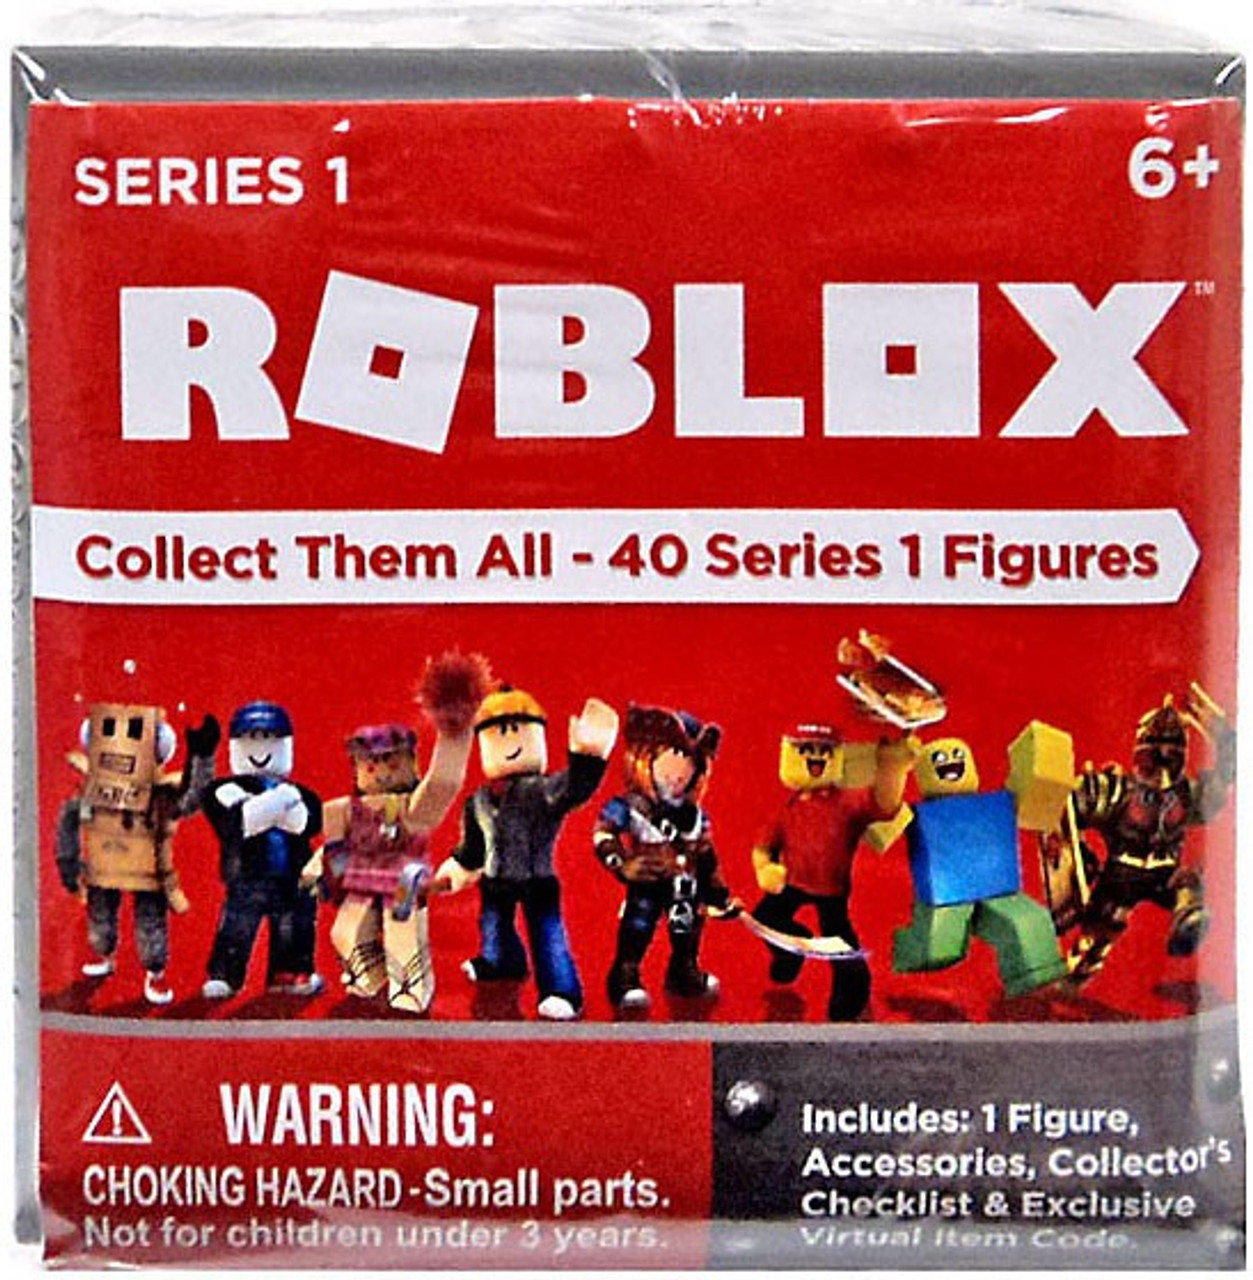 Vnvy0zlzfe0gpm - roblox series 1 lot of 7 figures virtual item new